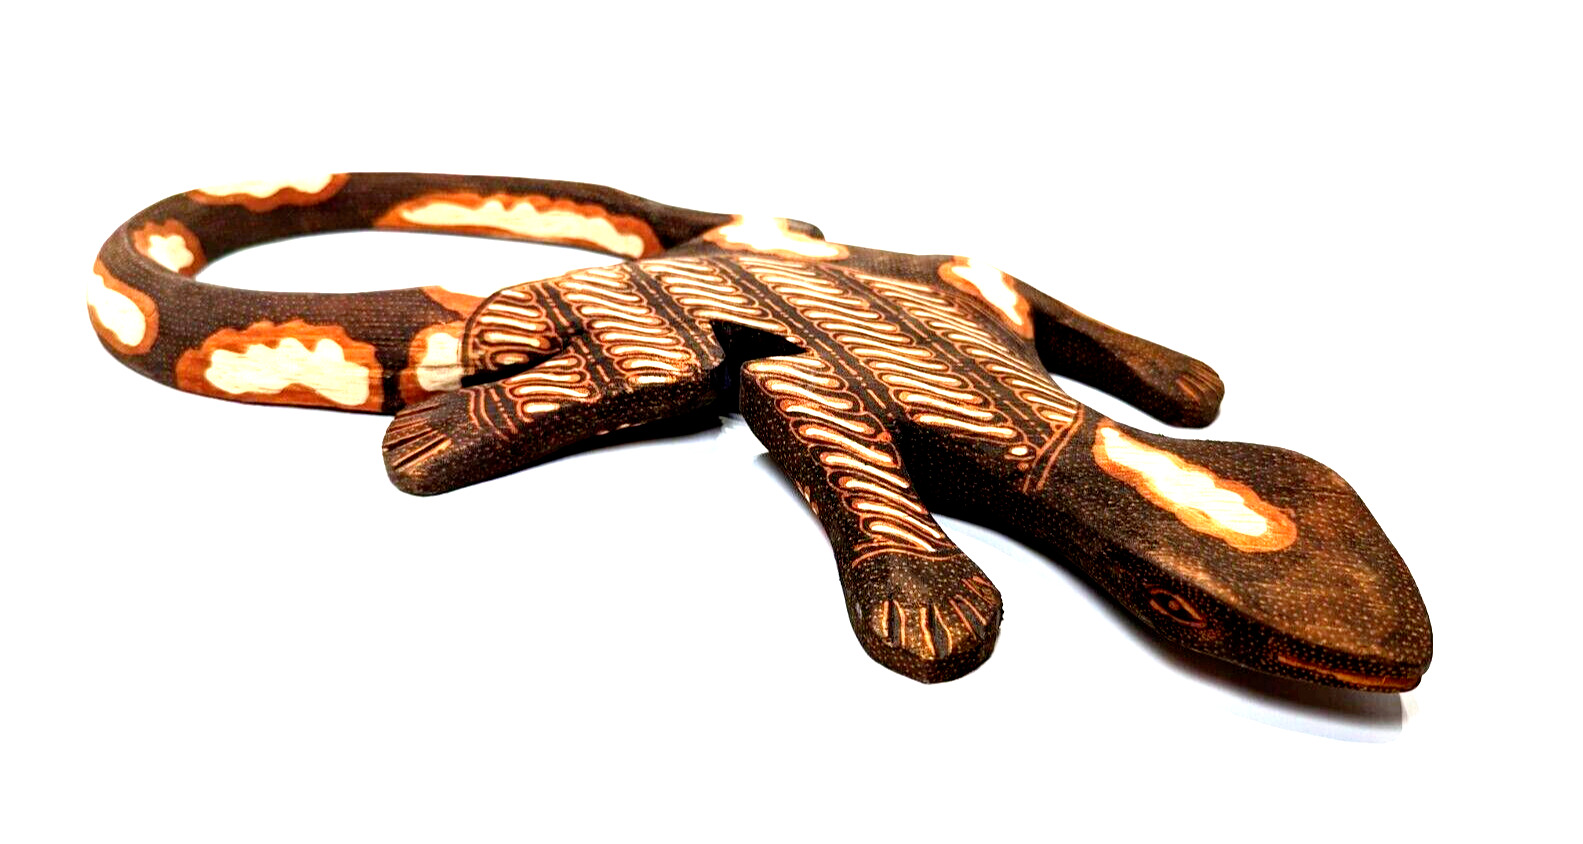 Gecko Lizard Hand Carved & Painted Wood - 13-3/4 Inches Long-Wall, Table, Shelf